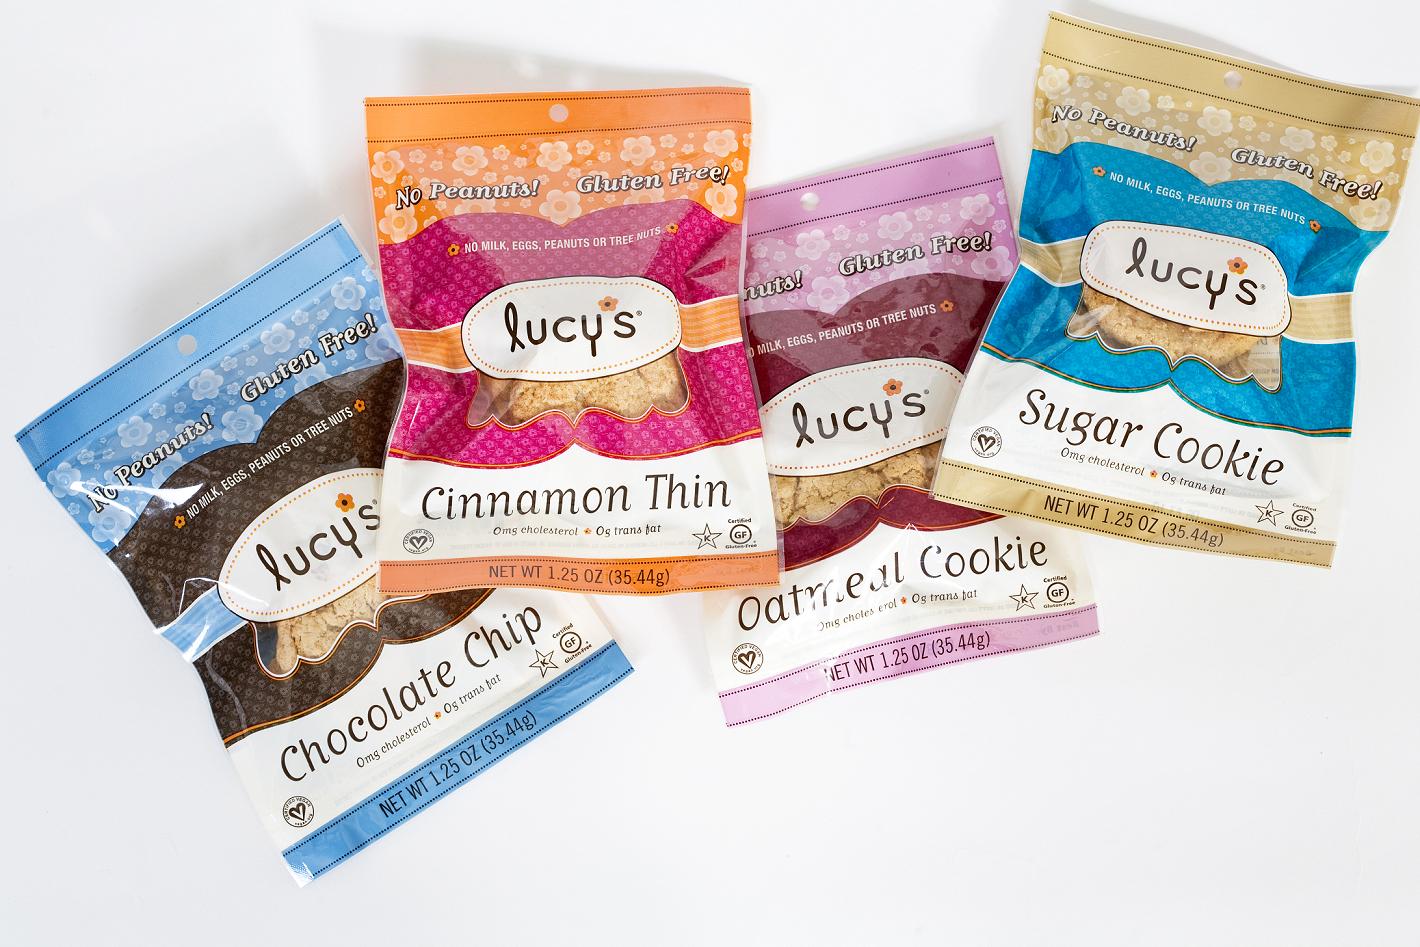 Dr. Lucy's Gluten Free Cookies